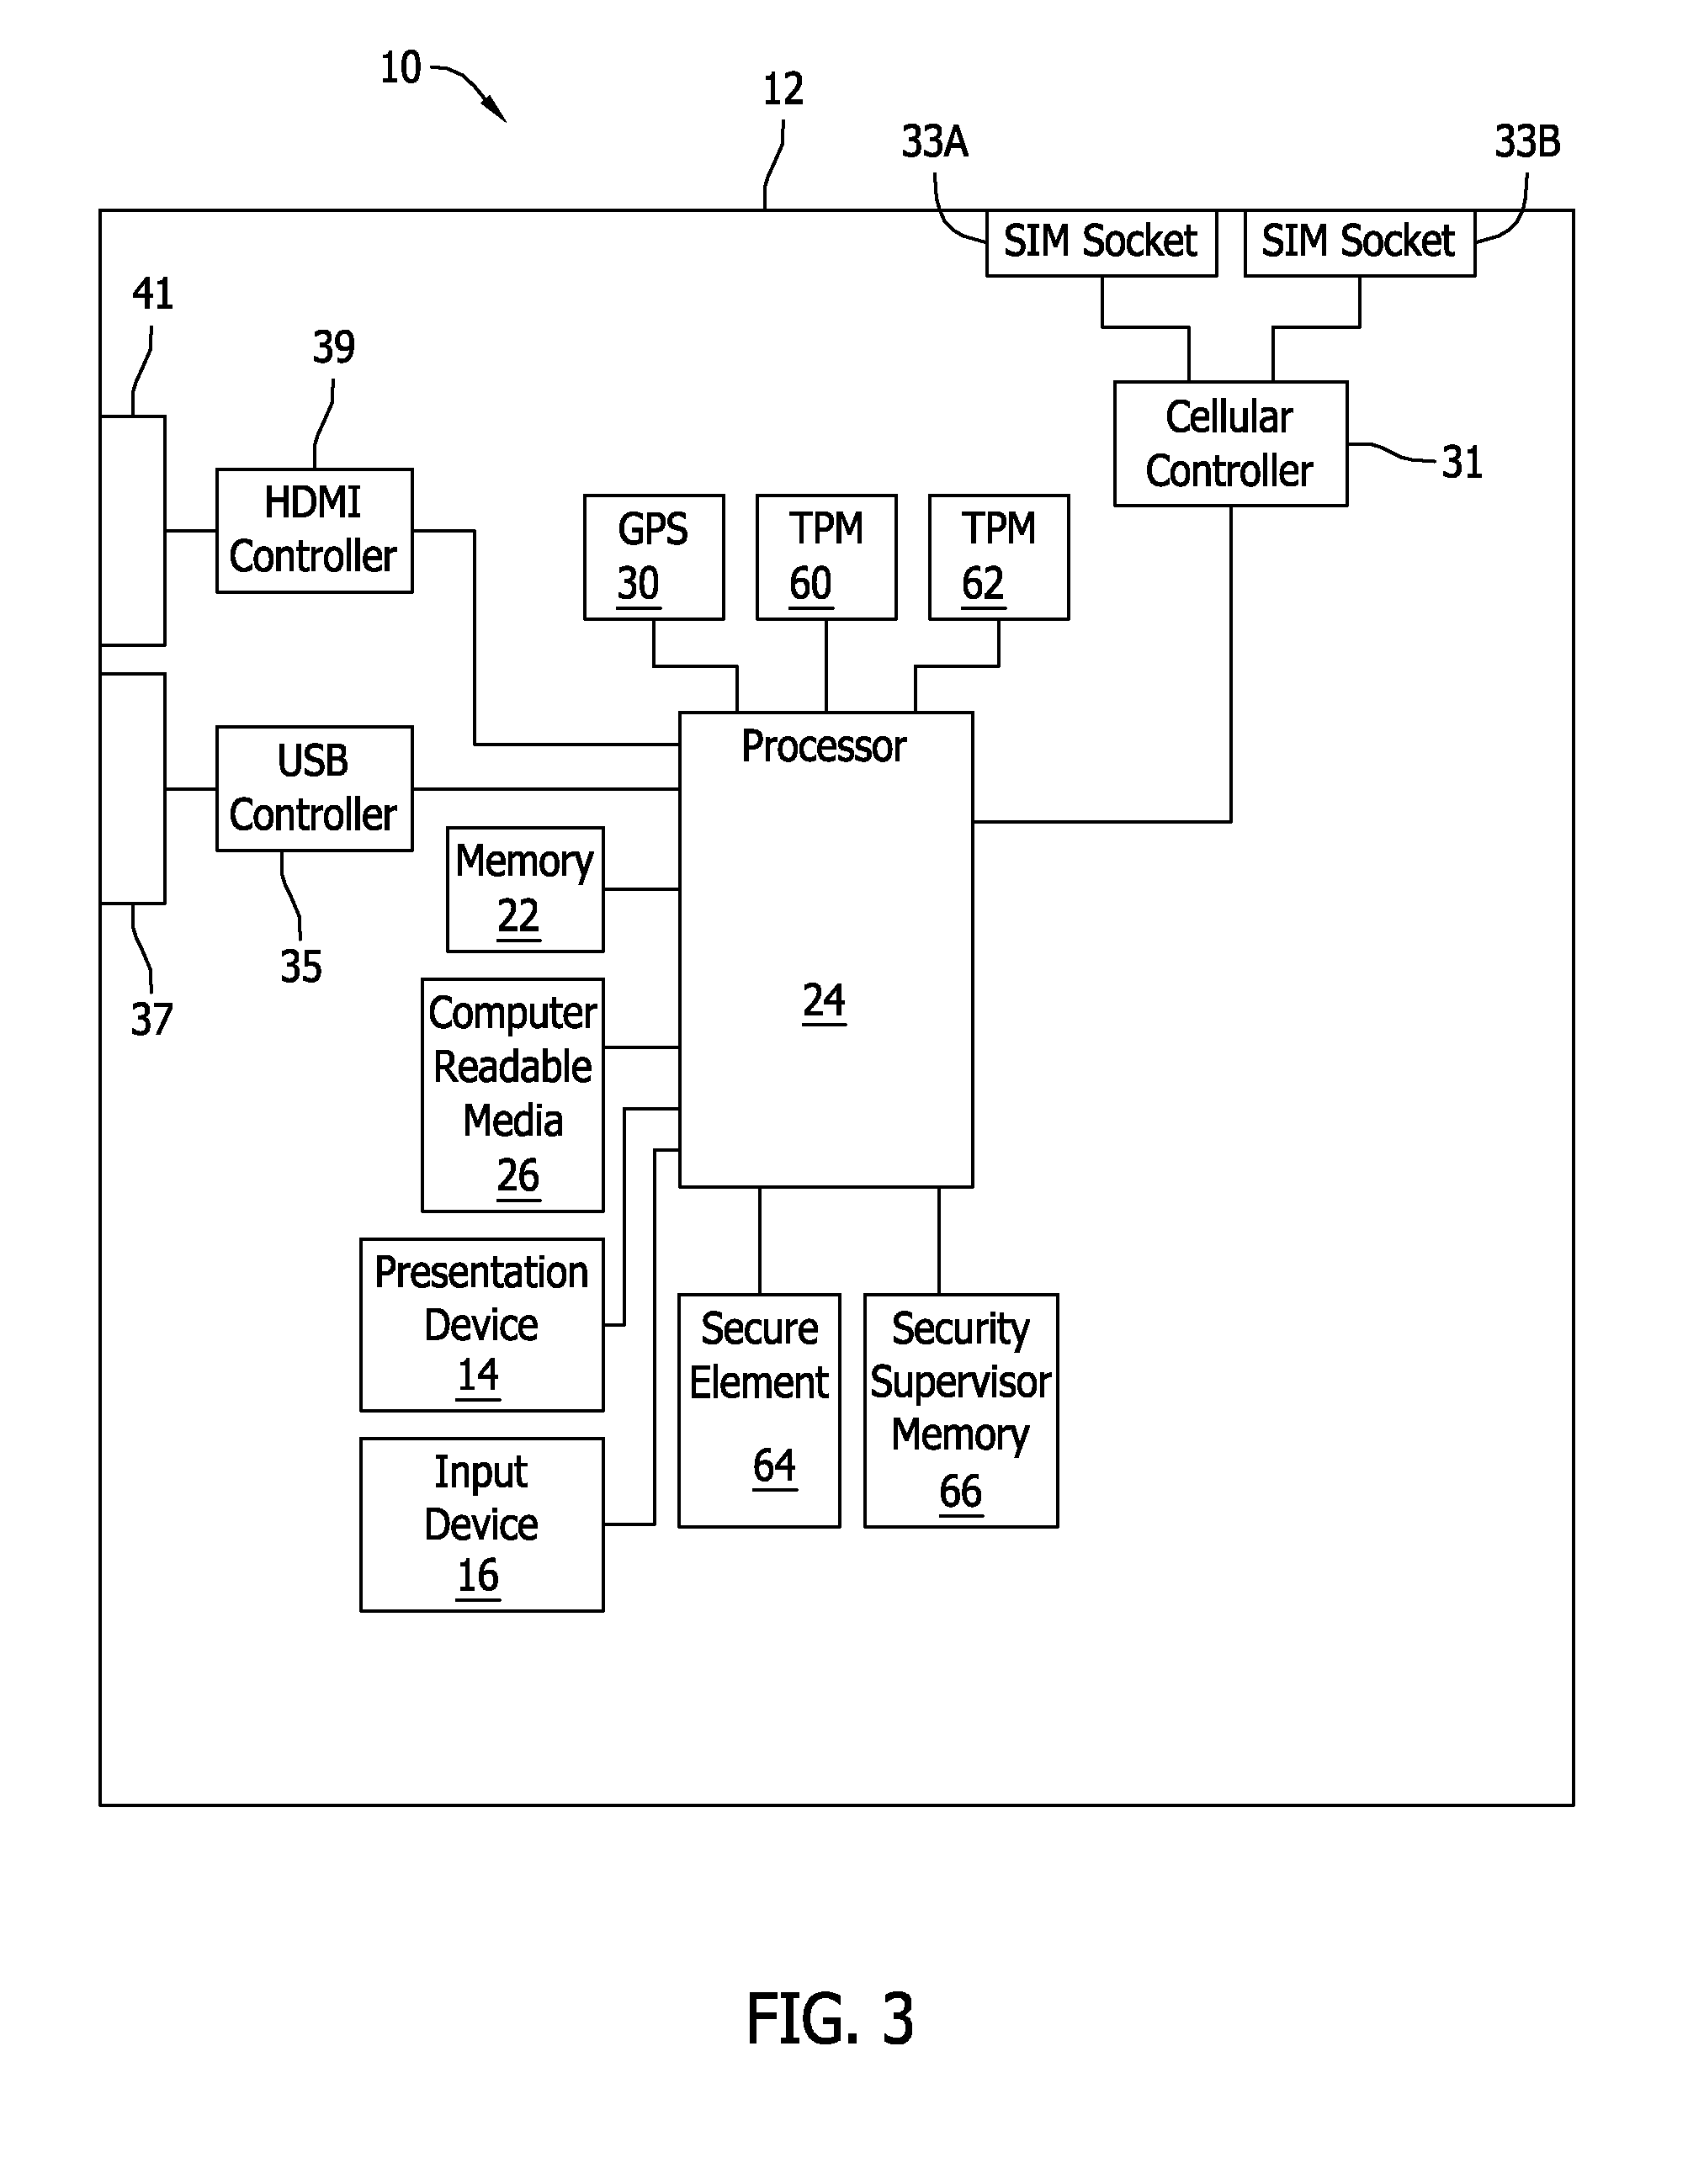 Method of authorizing an operation to be performed on a targeted computing device